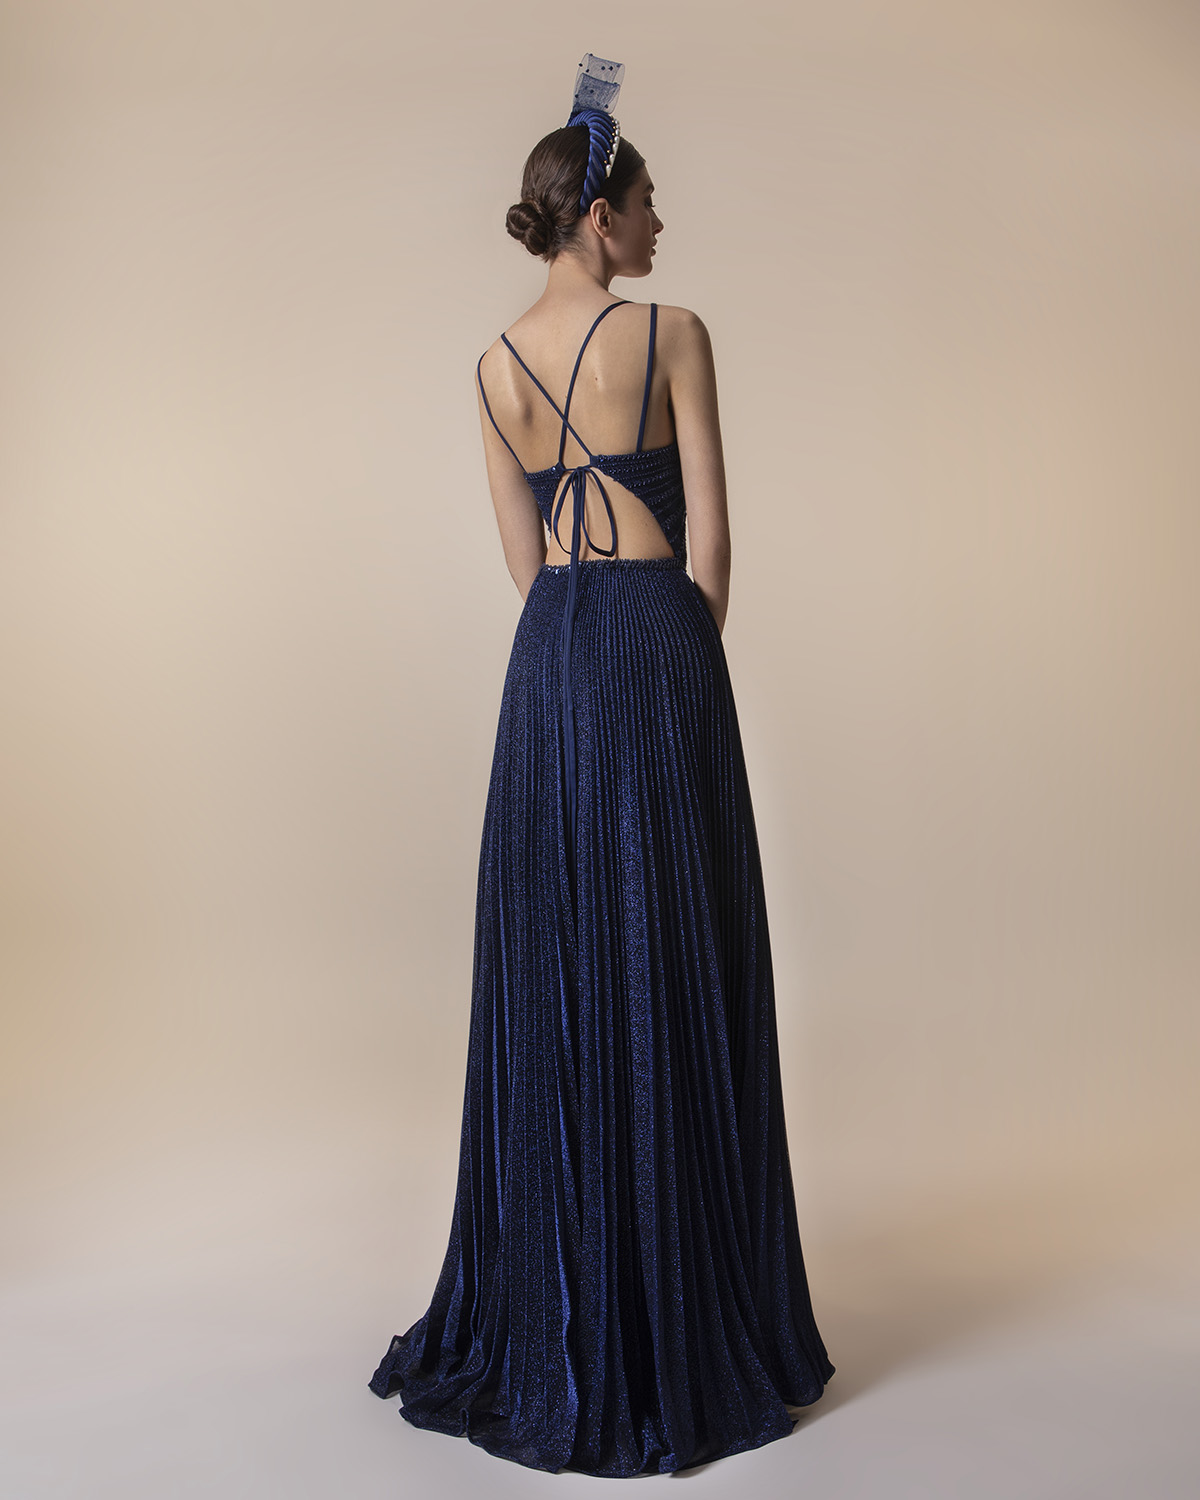 Evening Dresses / Long pleated evening dress with shining fabric and fully beaded top